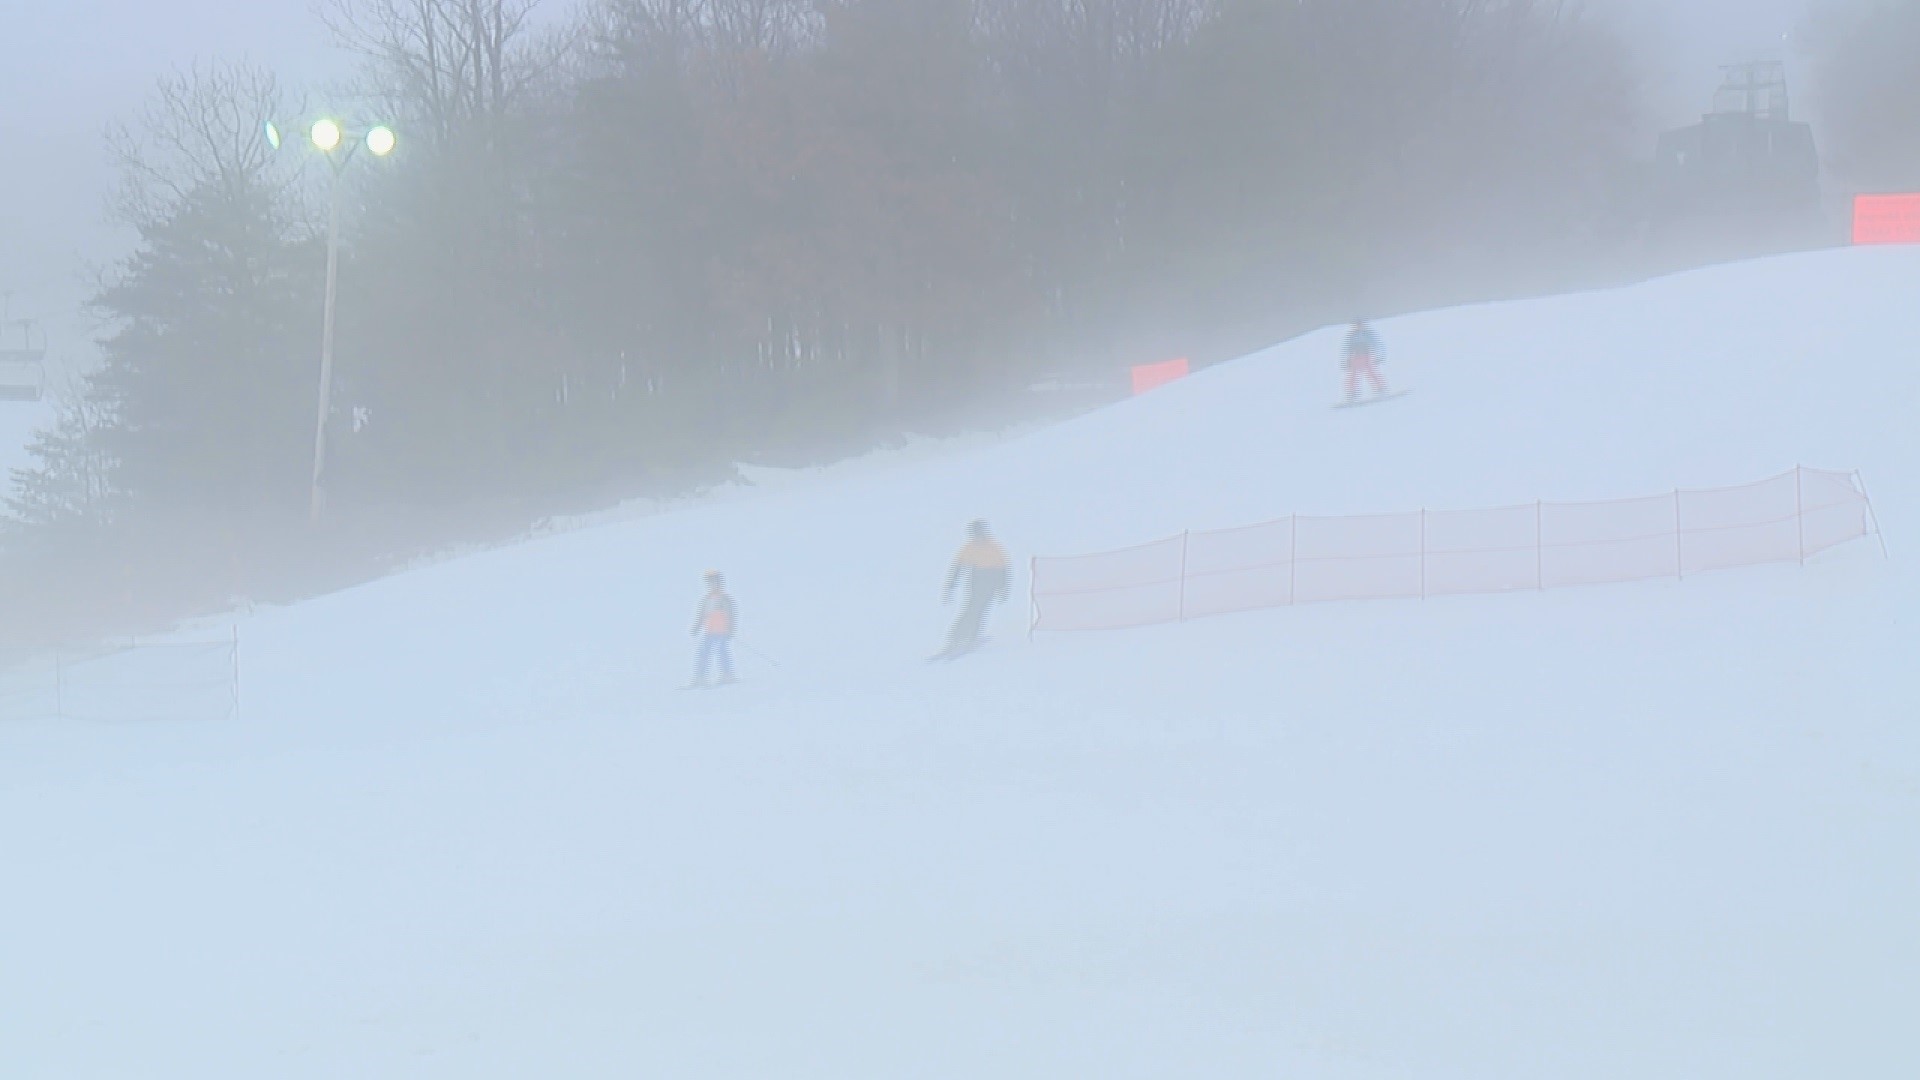 The abnormal seasonal temperatures are not stopping skiers and snowboarders from hitting the slopes.